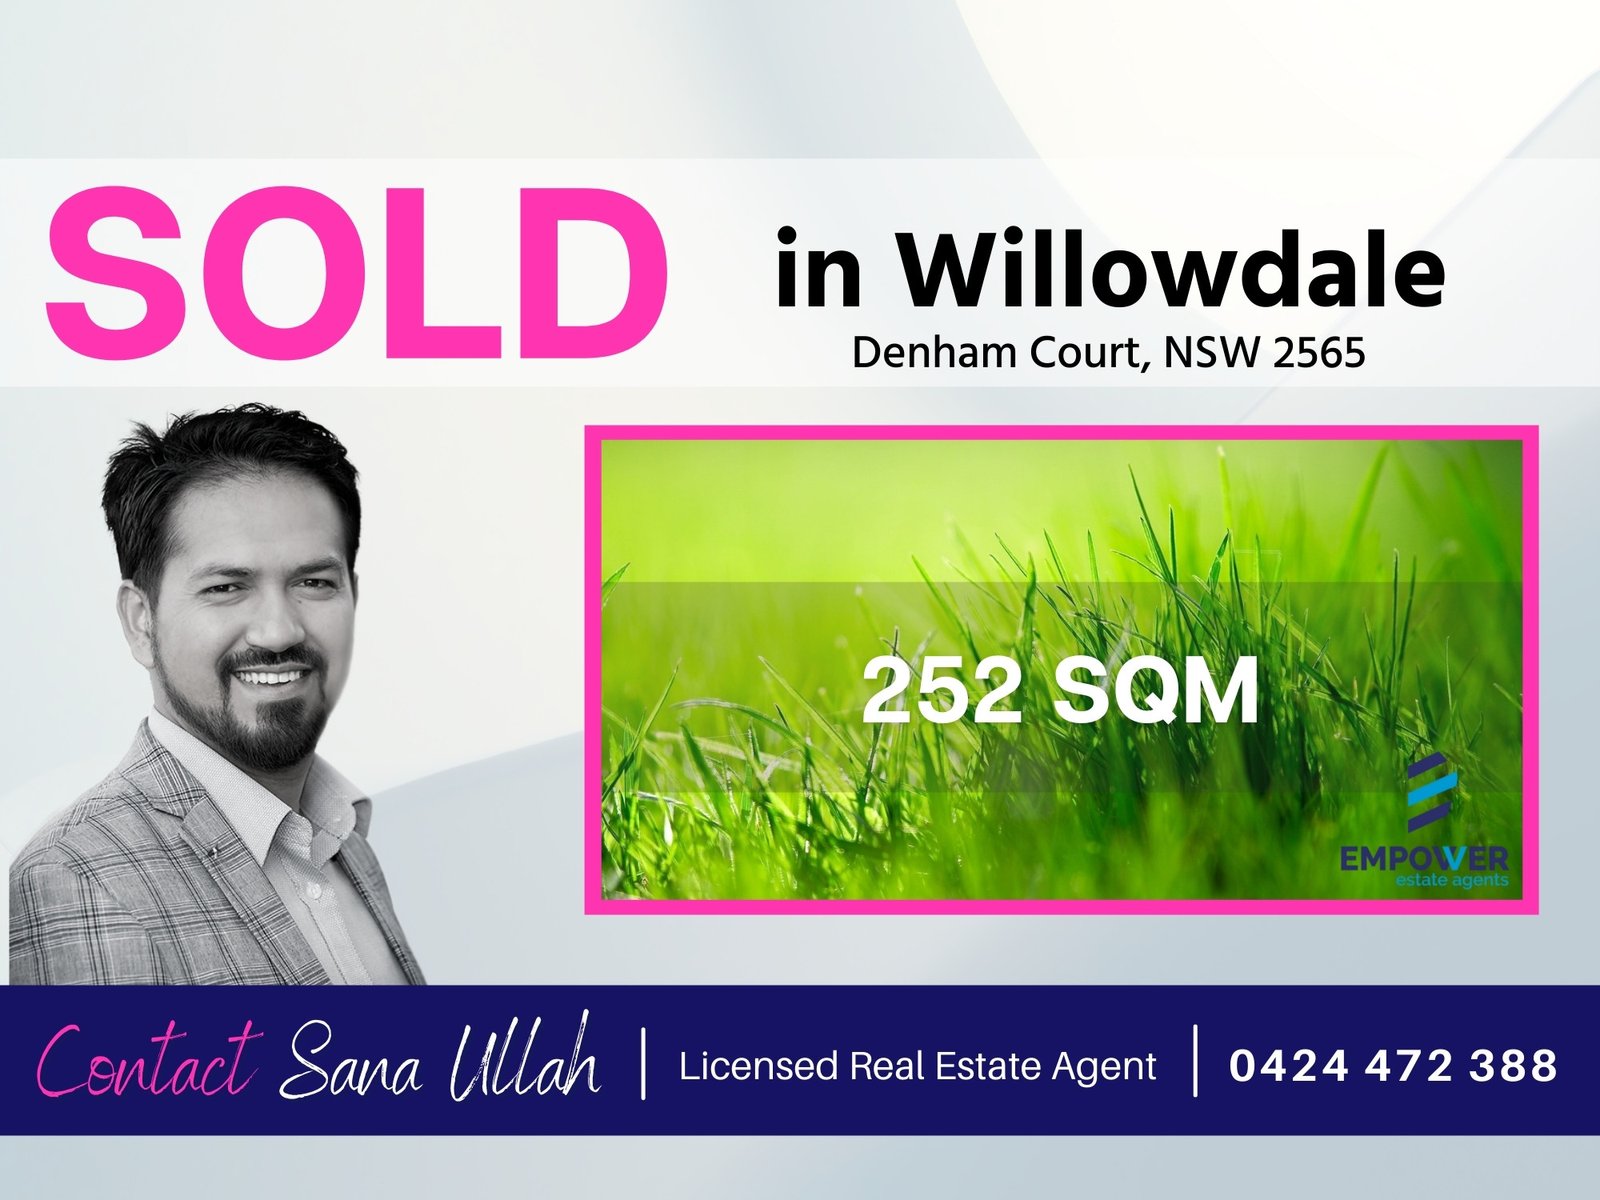 Sold by Sana Ullah, A well known real estate agent in Willowdale